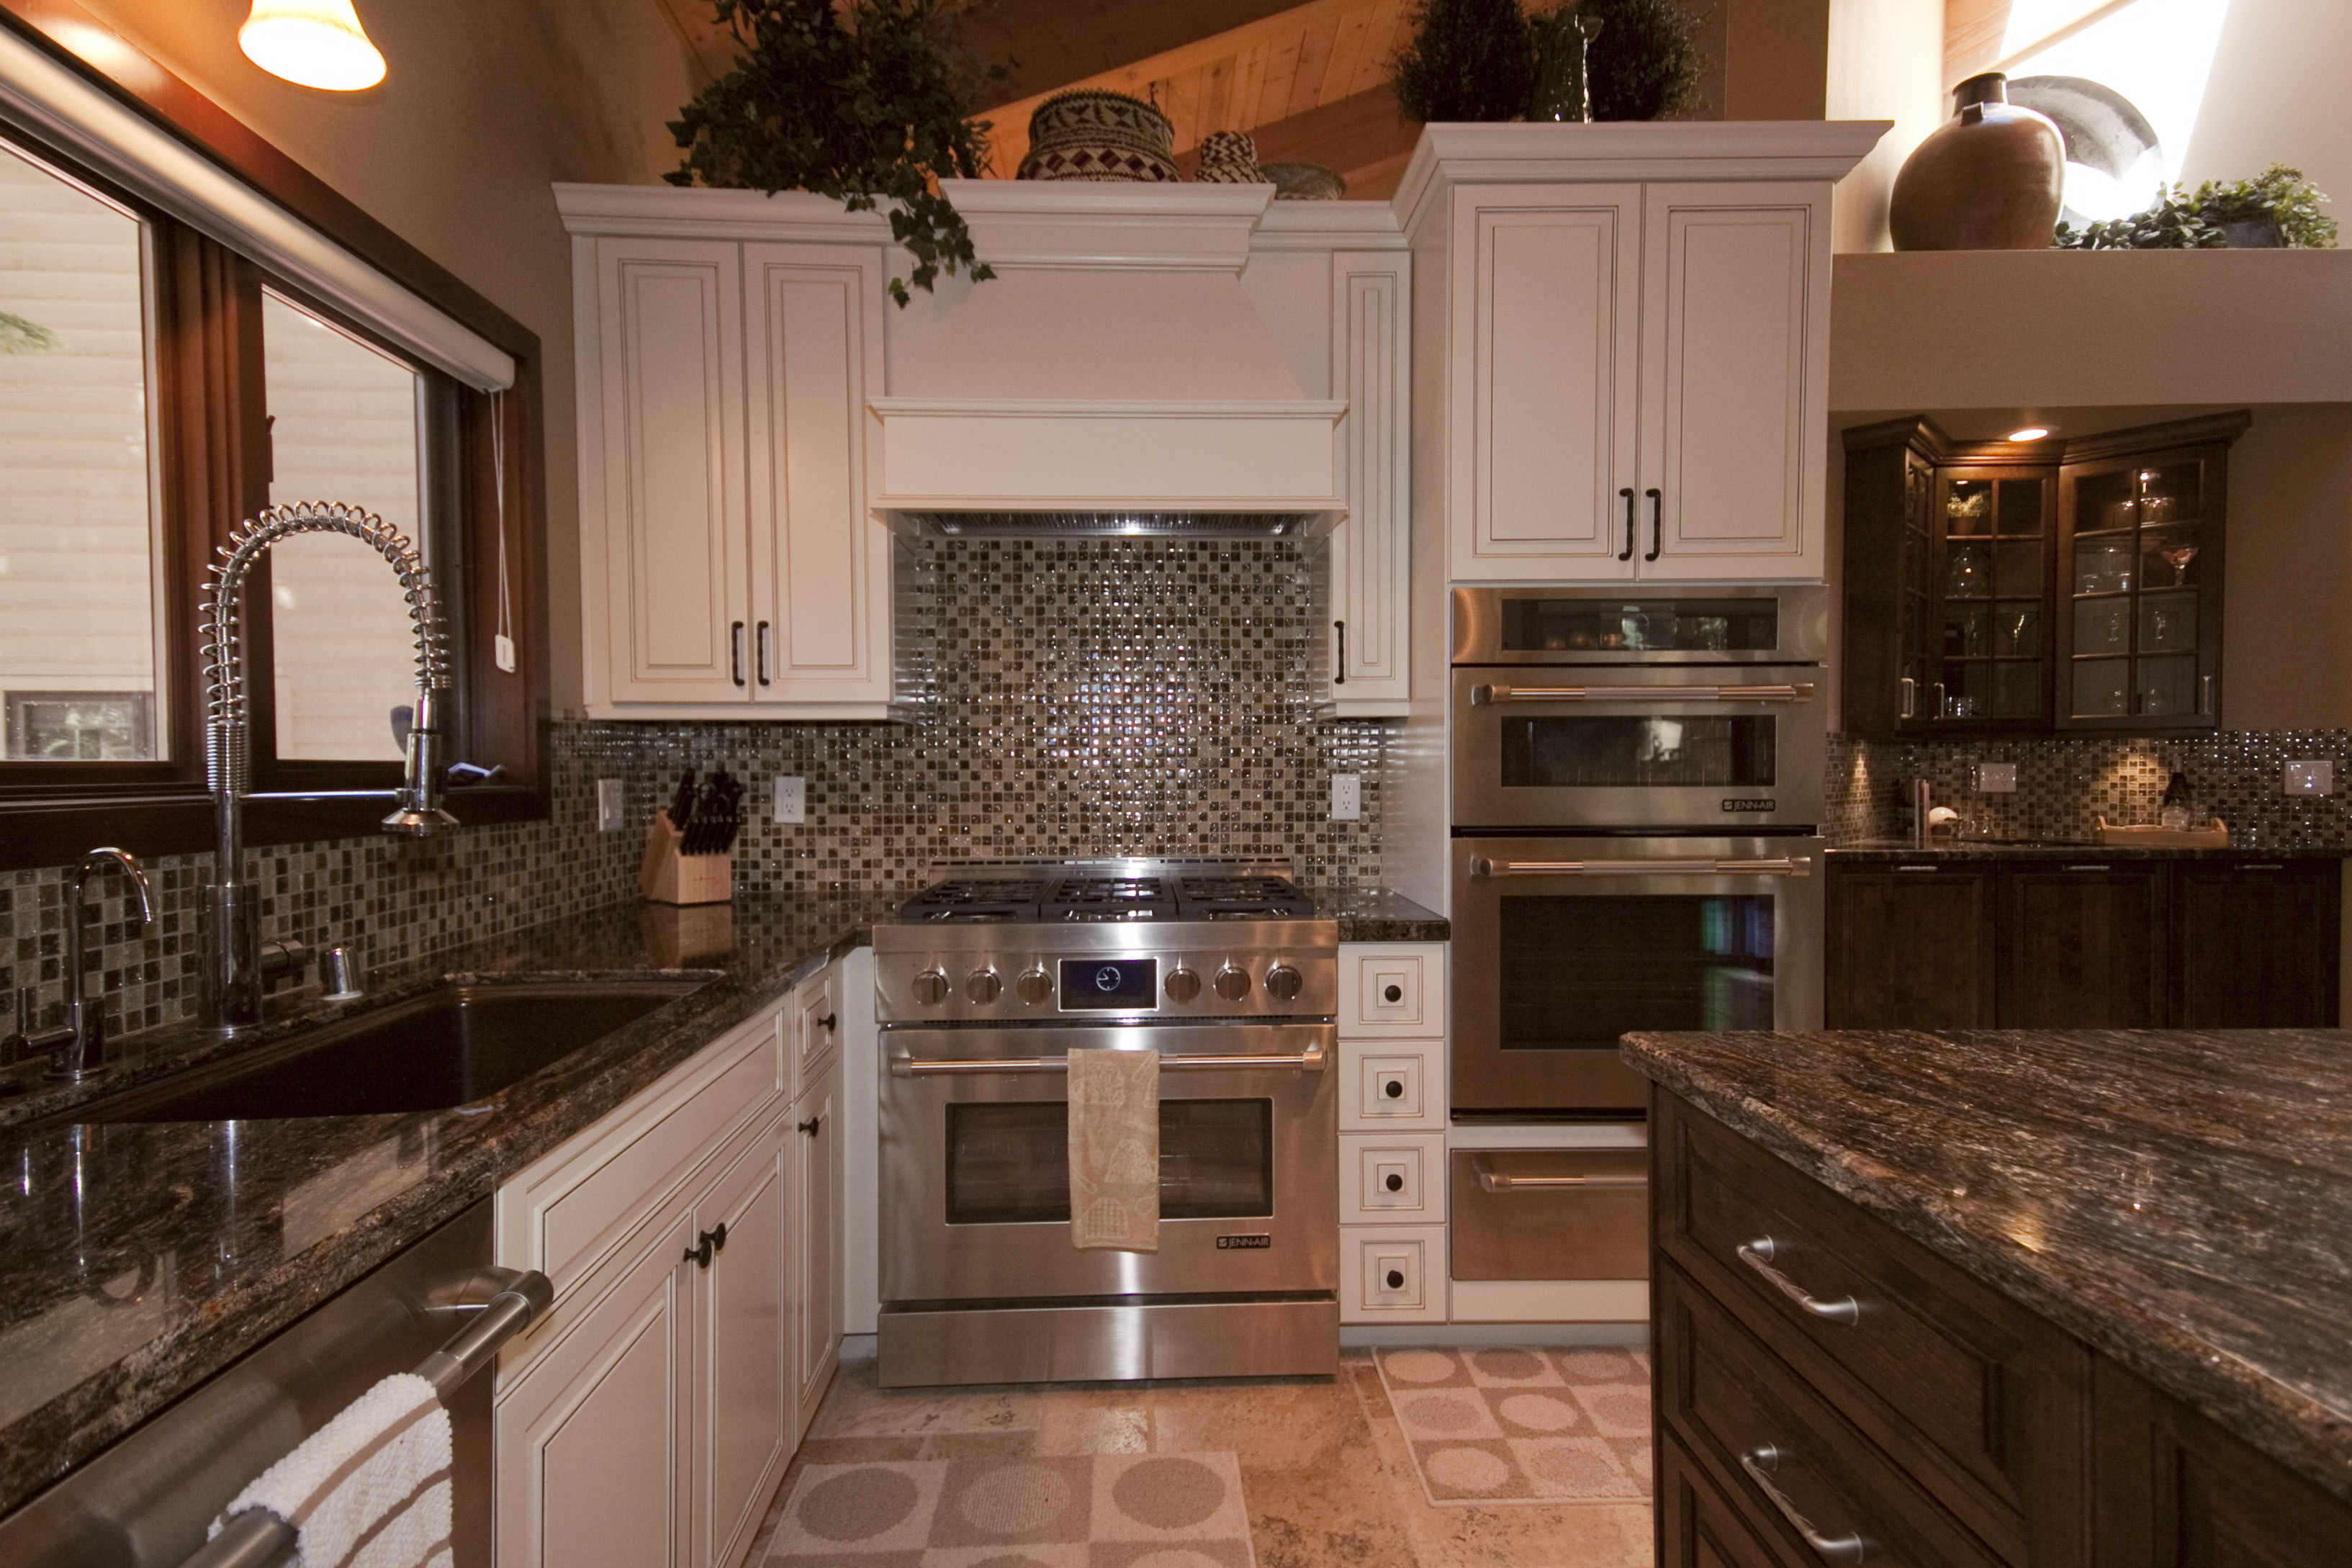 Kitchen Remodel Pictures
 Kitchen Remodeled Kitchens For Your Next